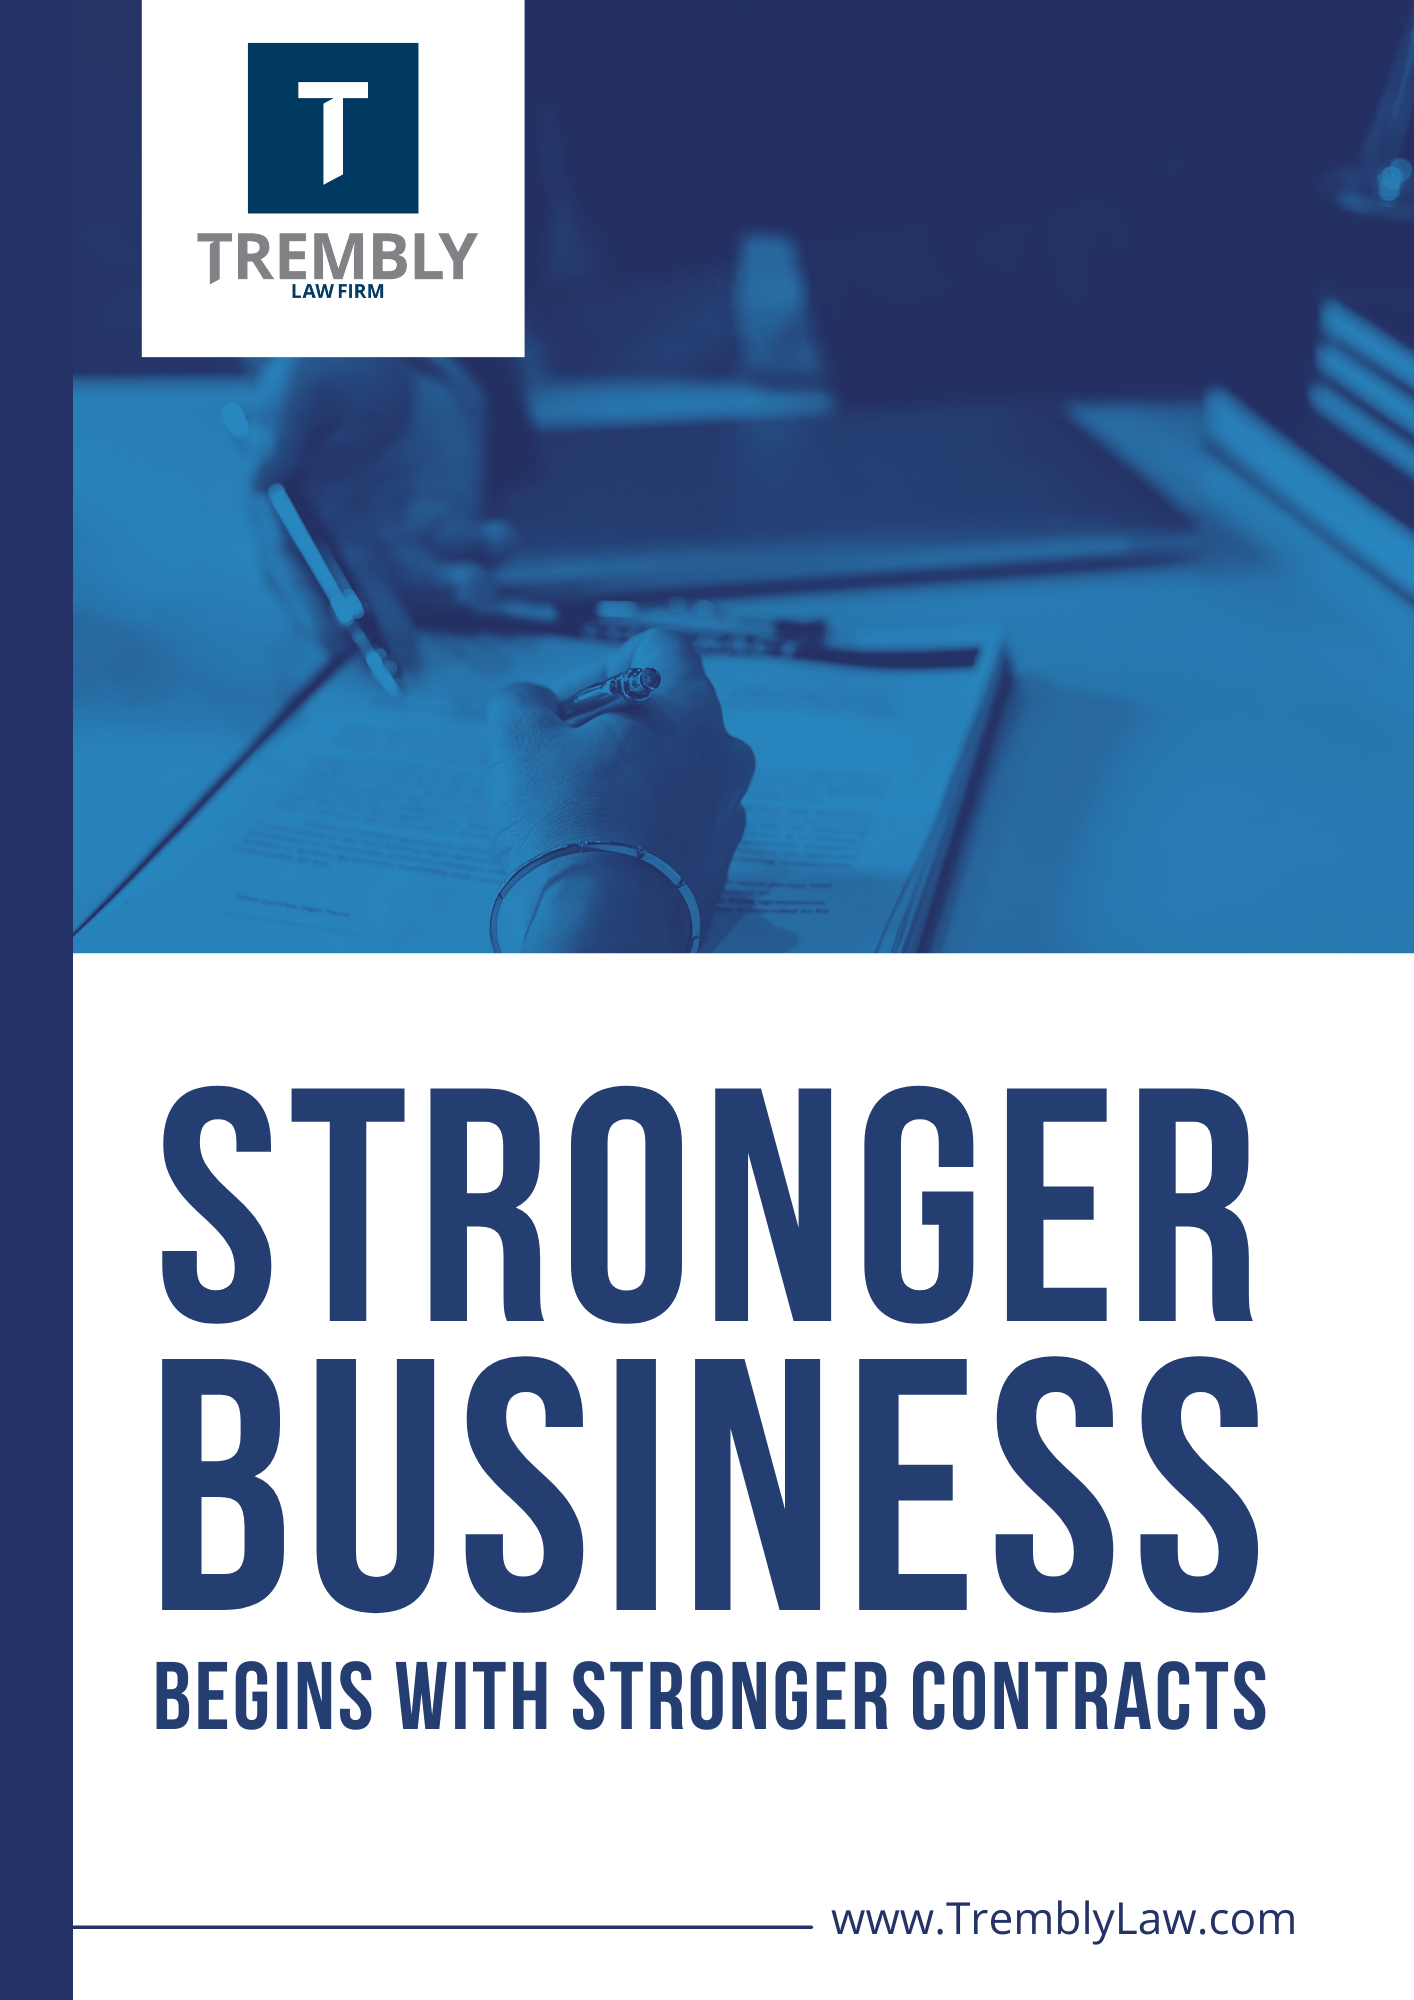 5 essential clauses that MUST be in every business contract